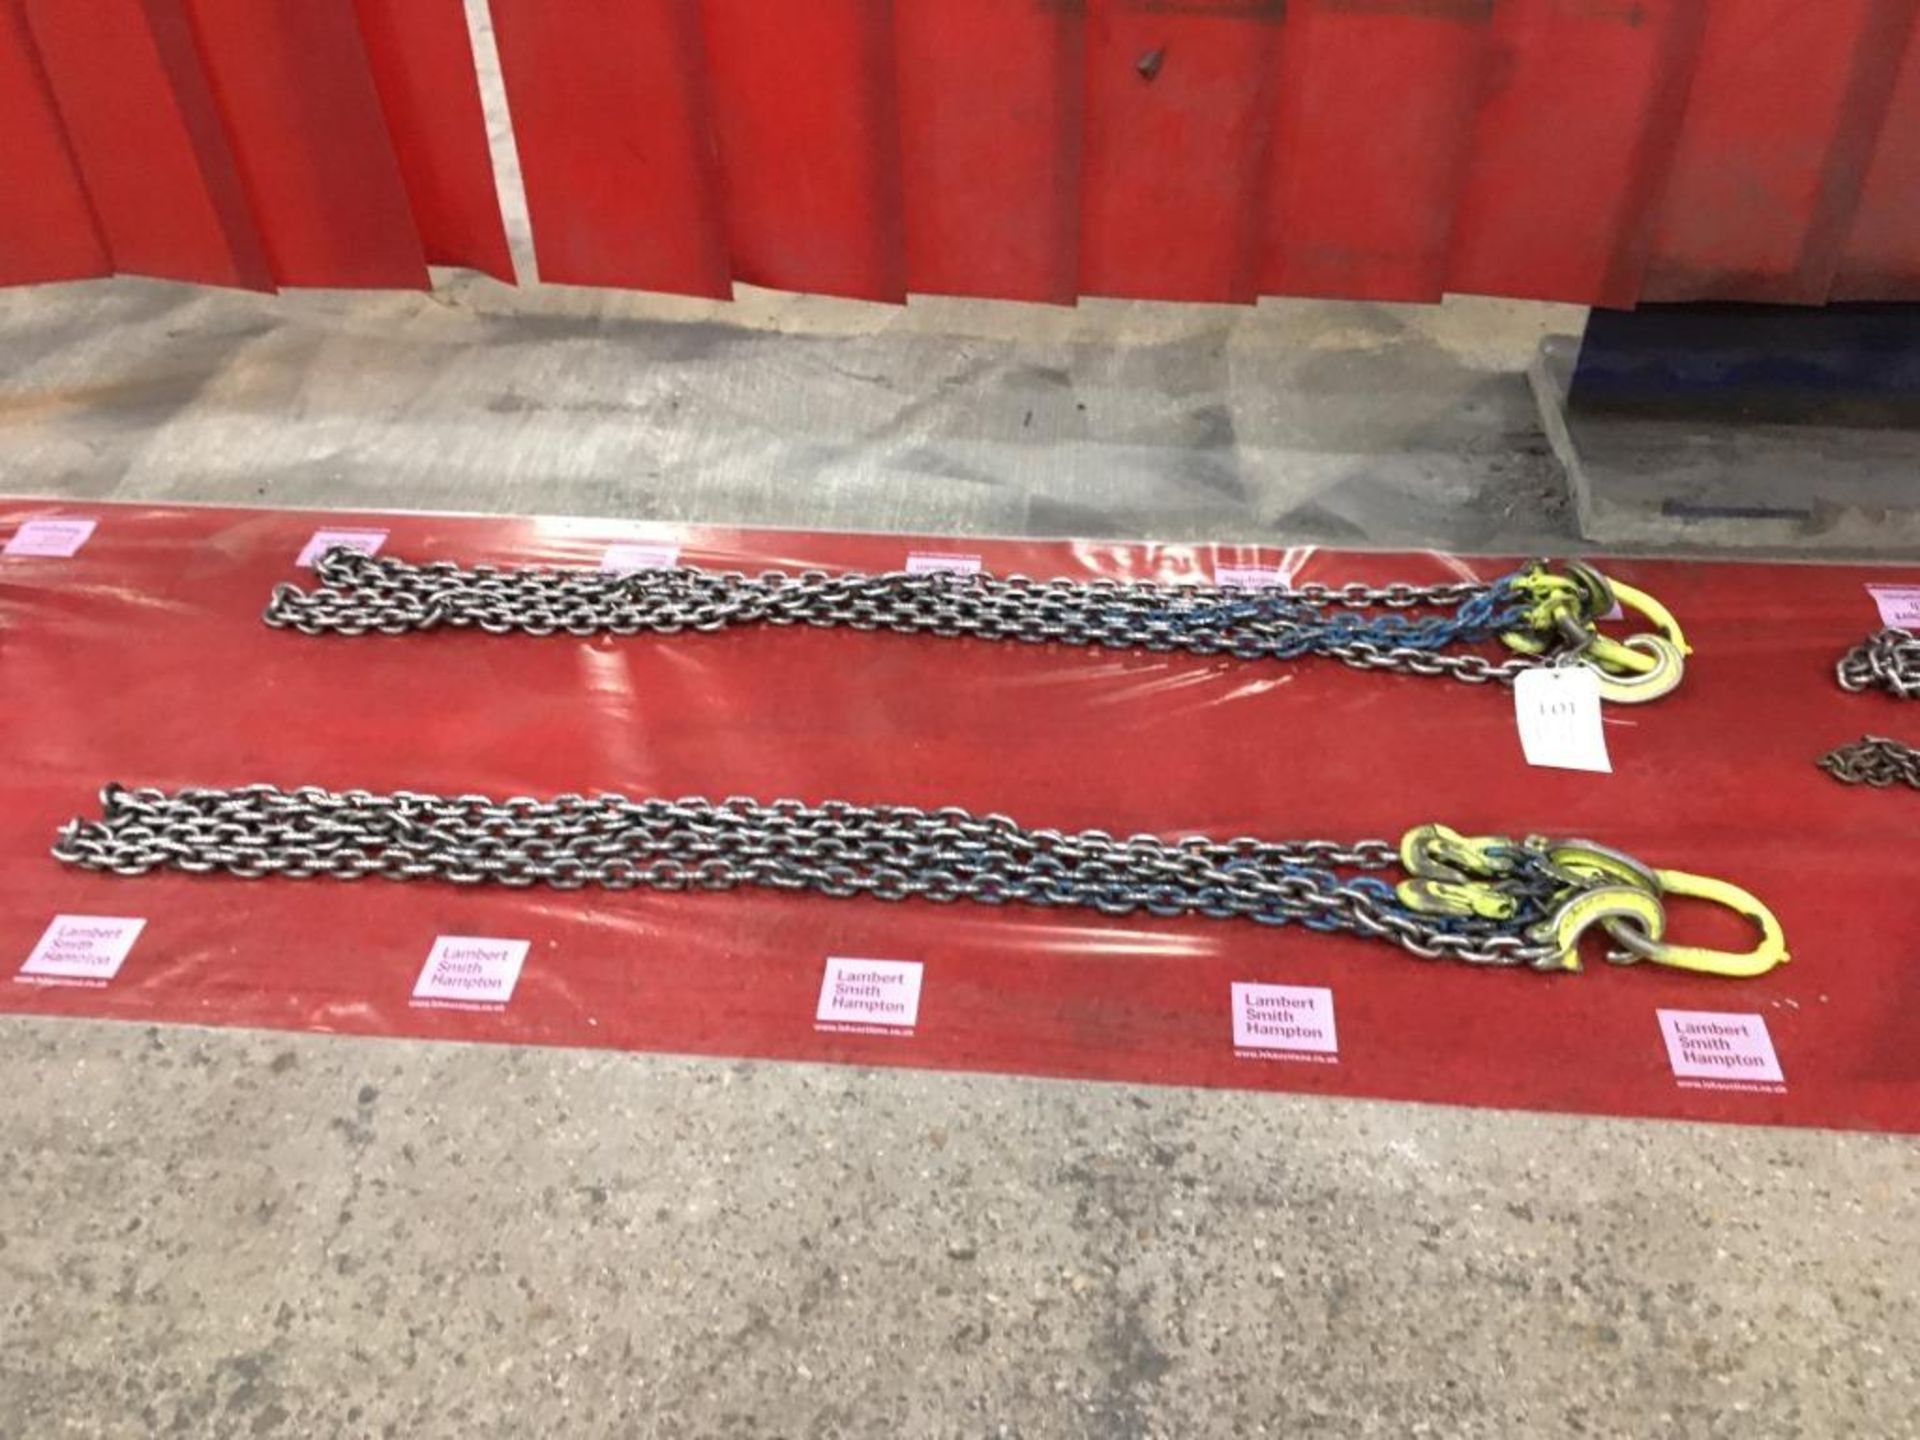 Two sets of lifting chains, LOLER certification: expiring 19/10/2021